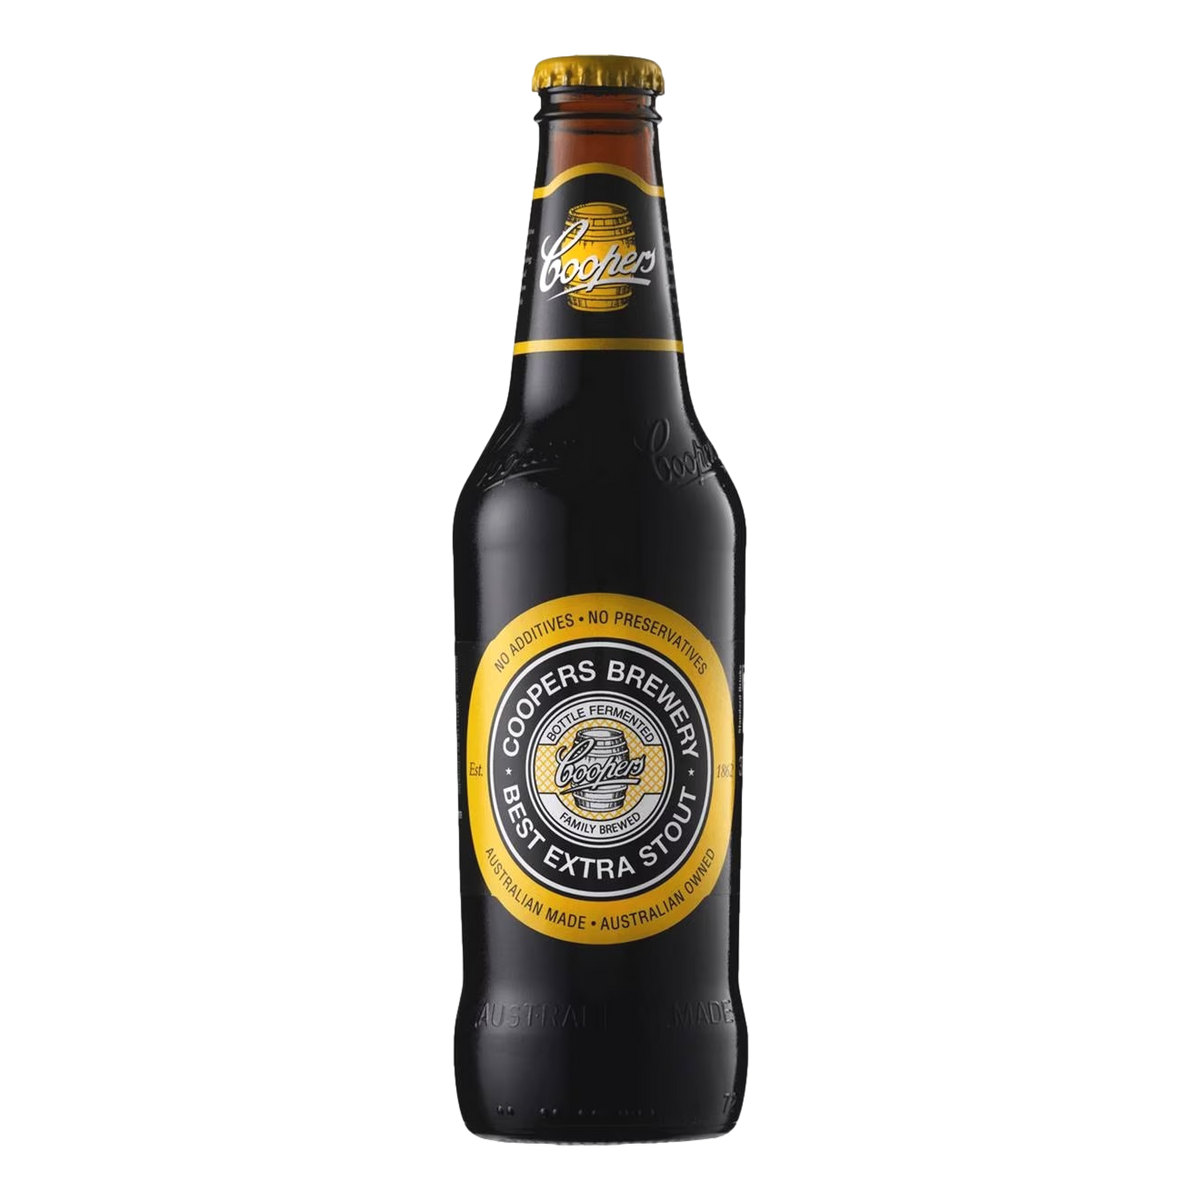 Coopers Extra Stout 6.3% 375ml Bottle Single